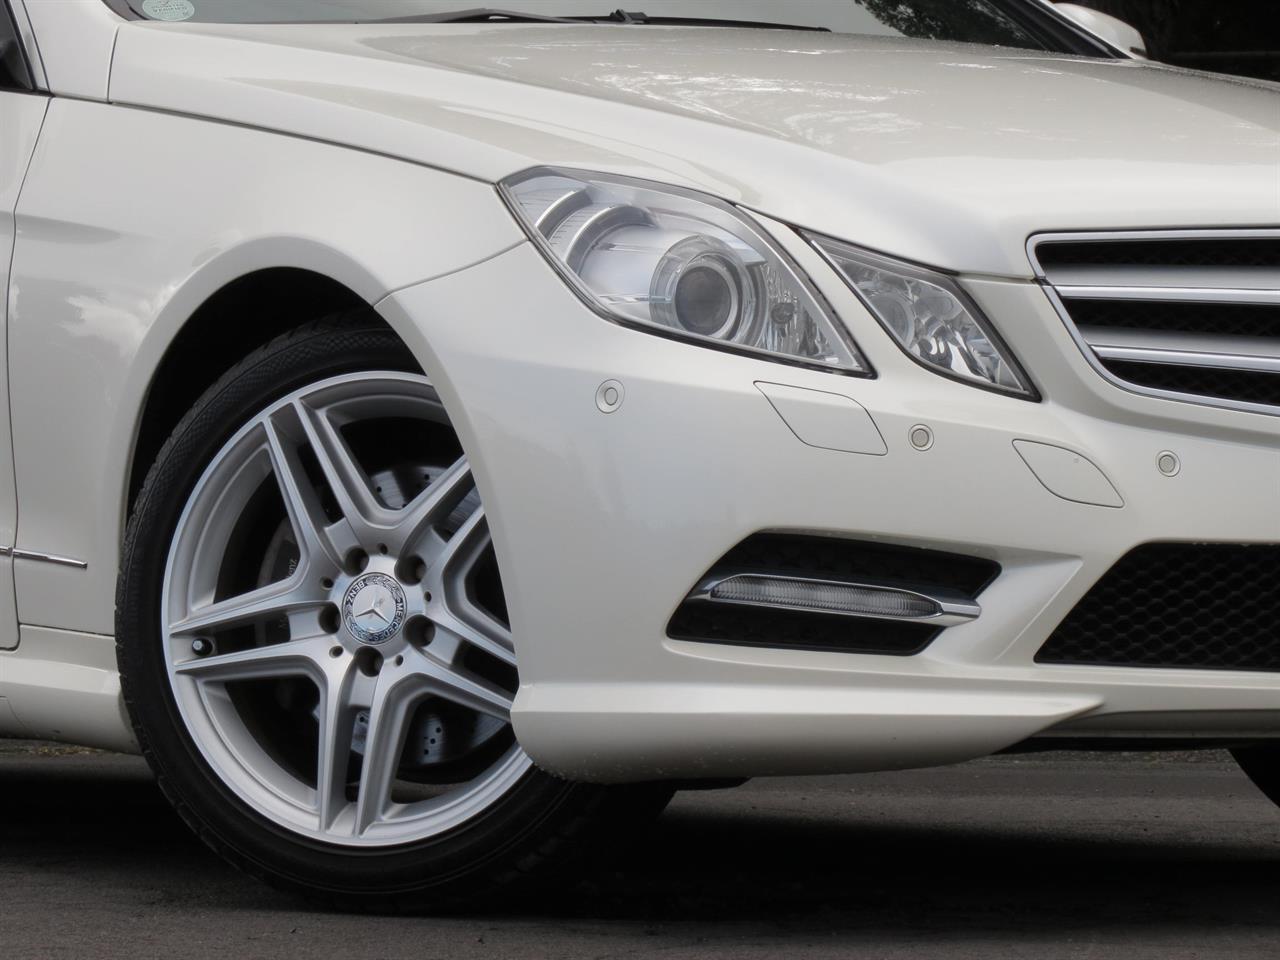 2012 Mercedes-Benz E 350 only $67 weekly